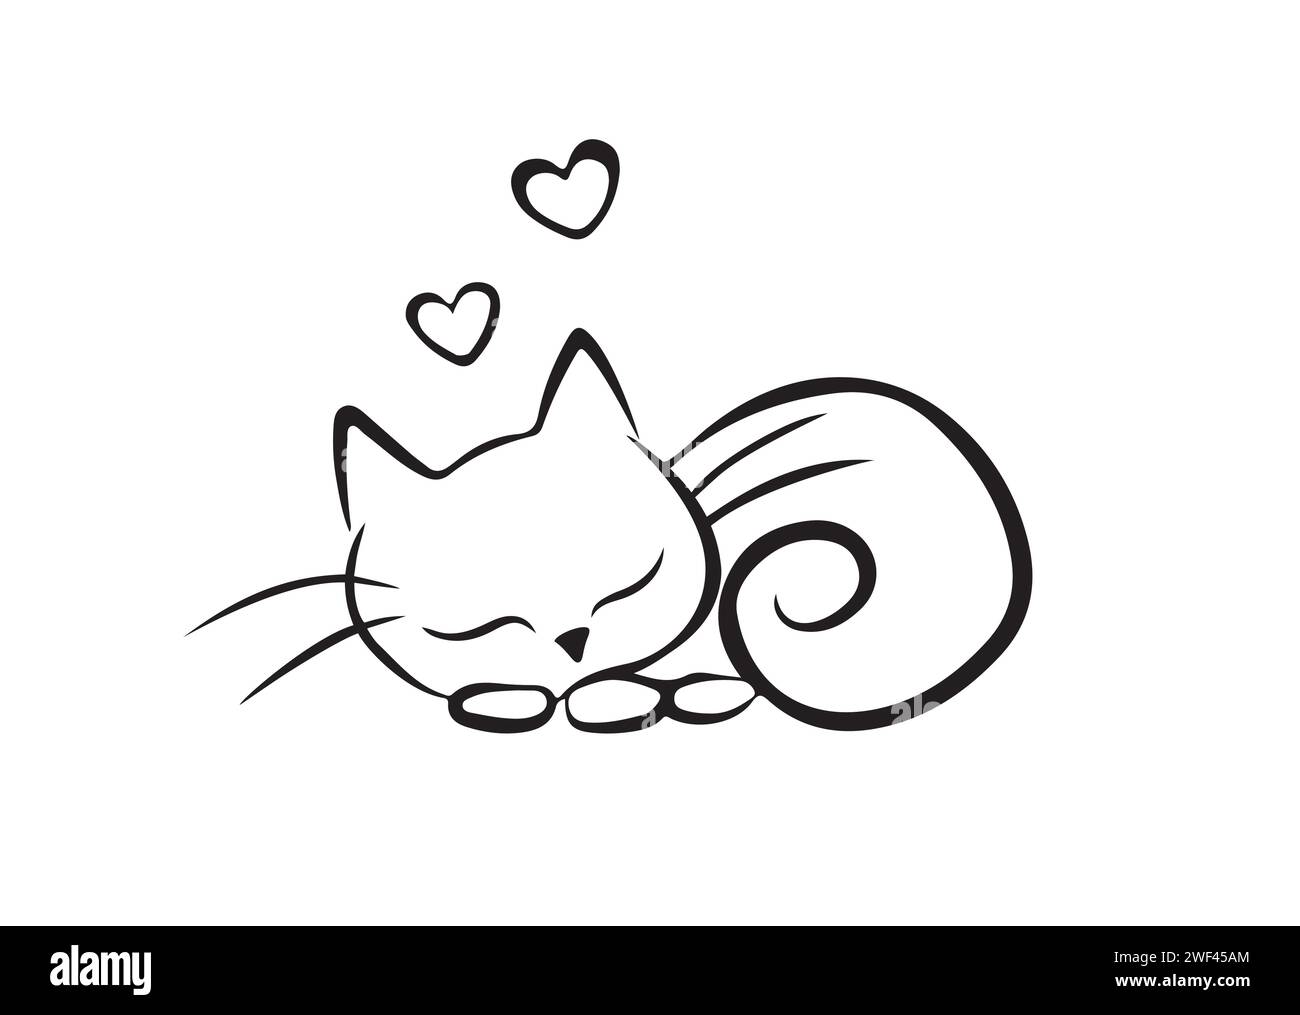 Sleeping cat ,dreaming about love Stock Vector